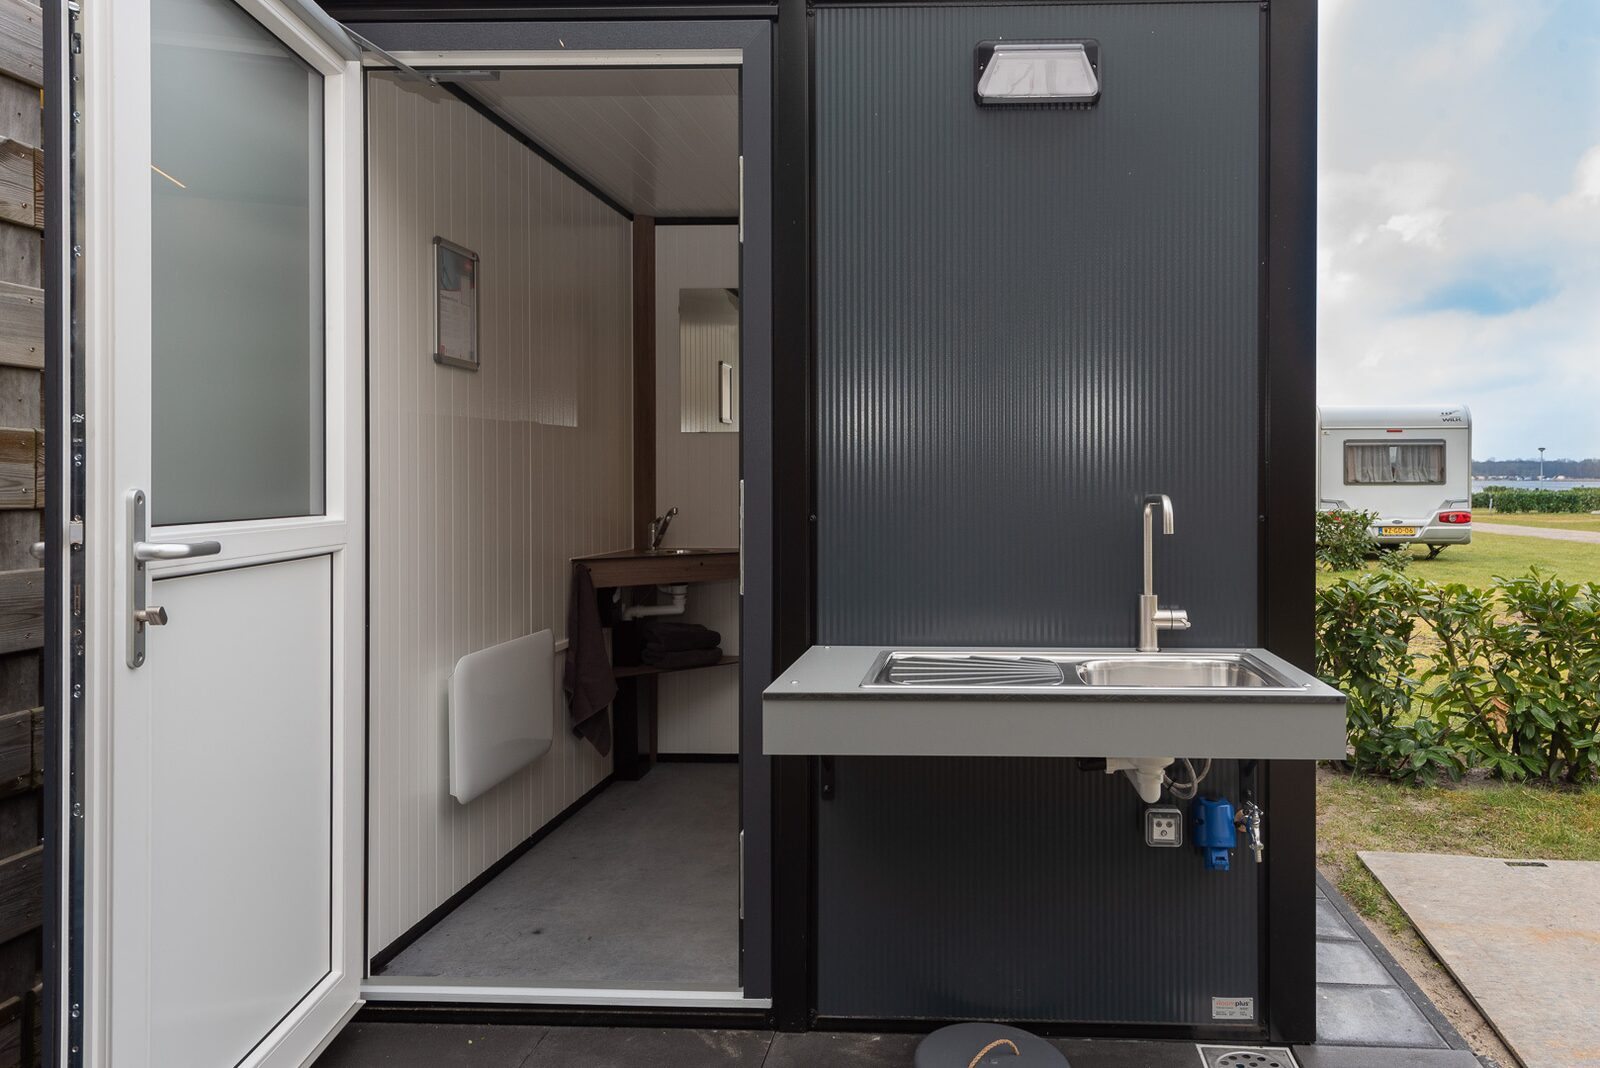 Comfort pitch with private sanitary facilities